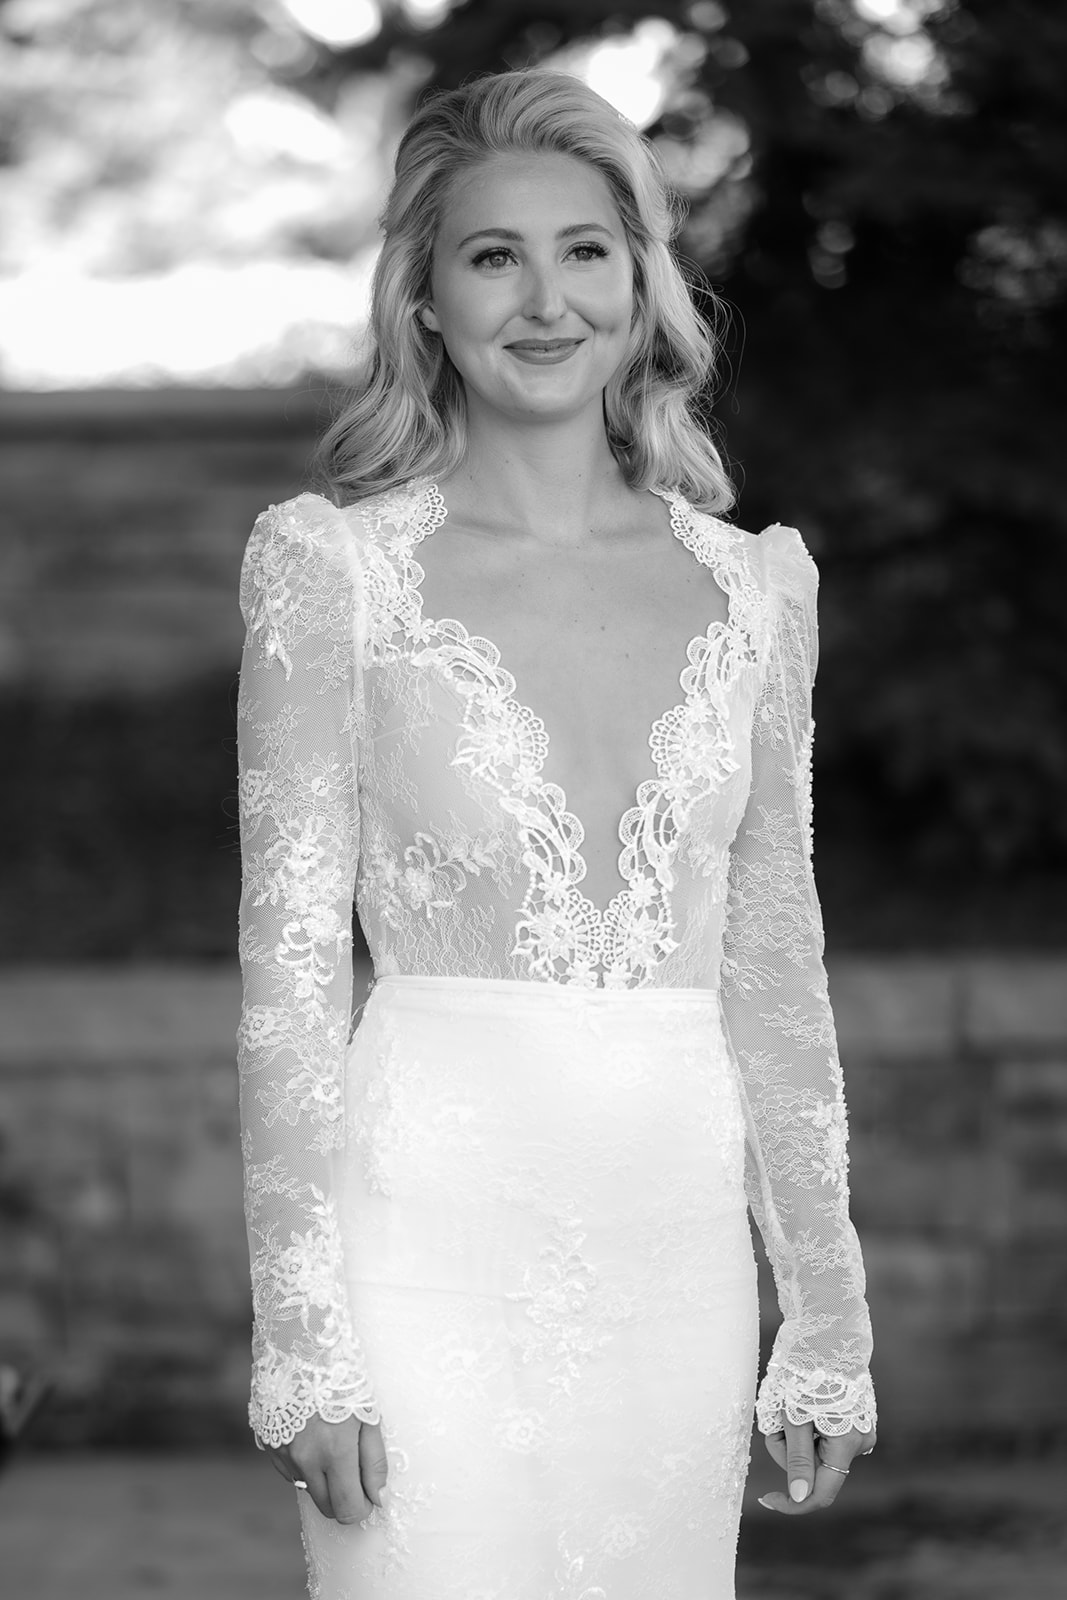 Stunning blonde bride in a Dress from LWD Boutique in Denver, Colorado.